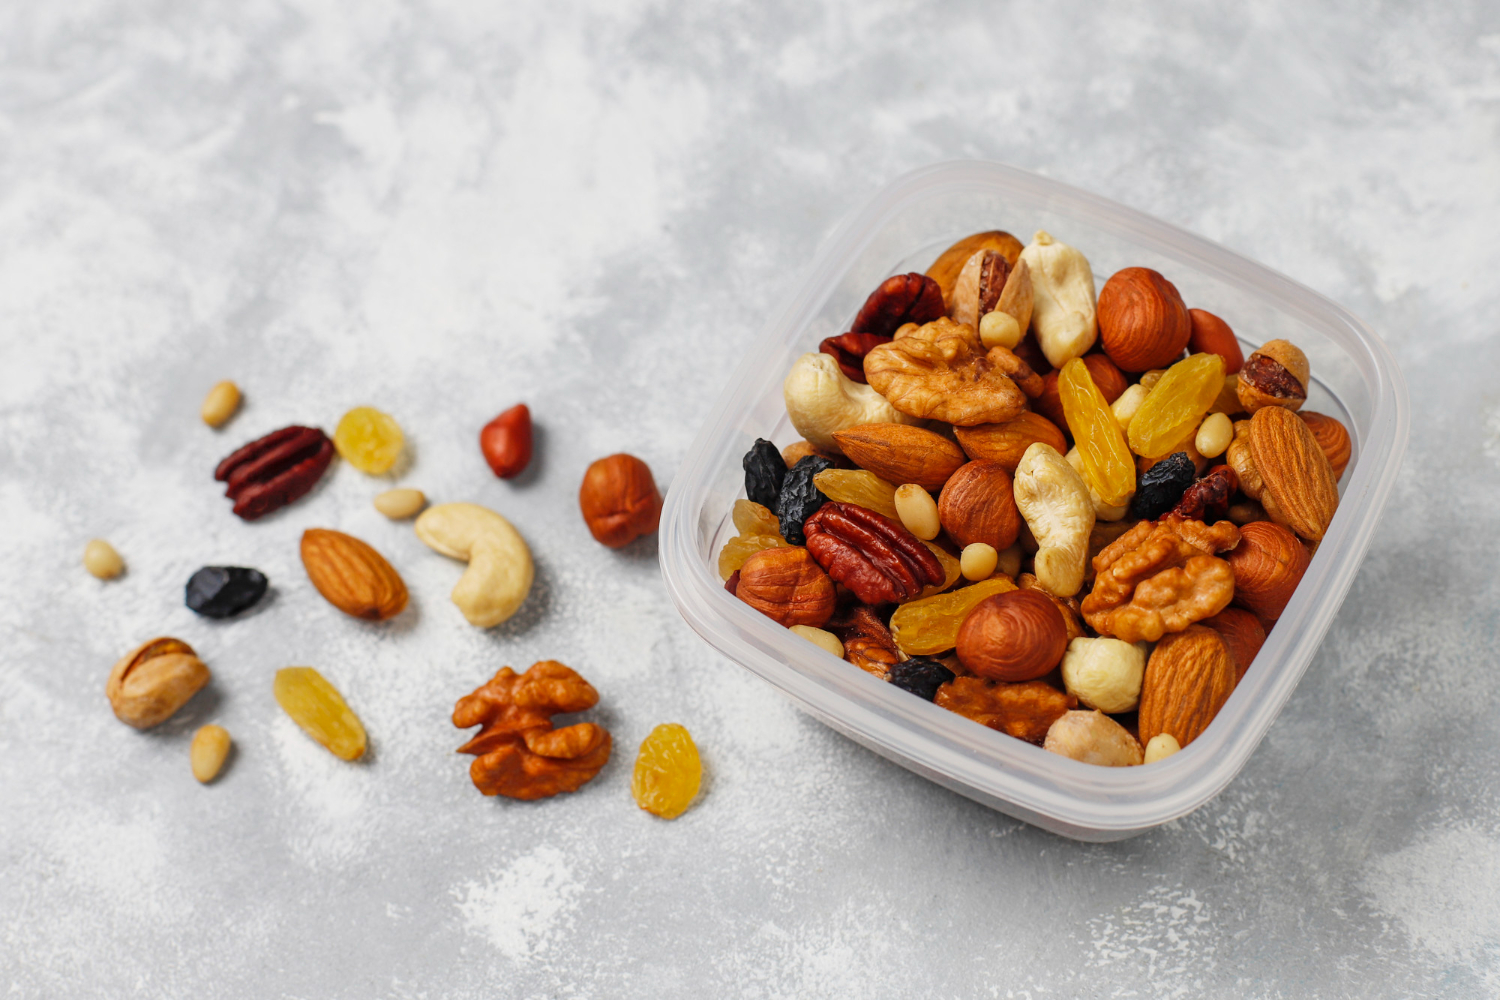 Why Satyanarayan Mukhwas and Dry Fruit is Your Best Choice for Premium Dry Fruits